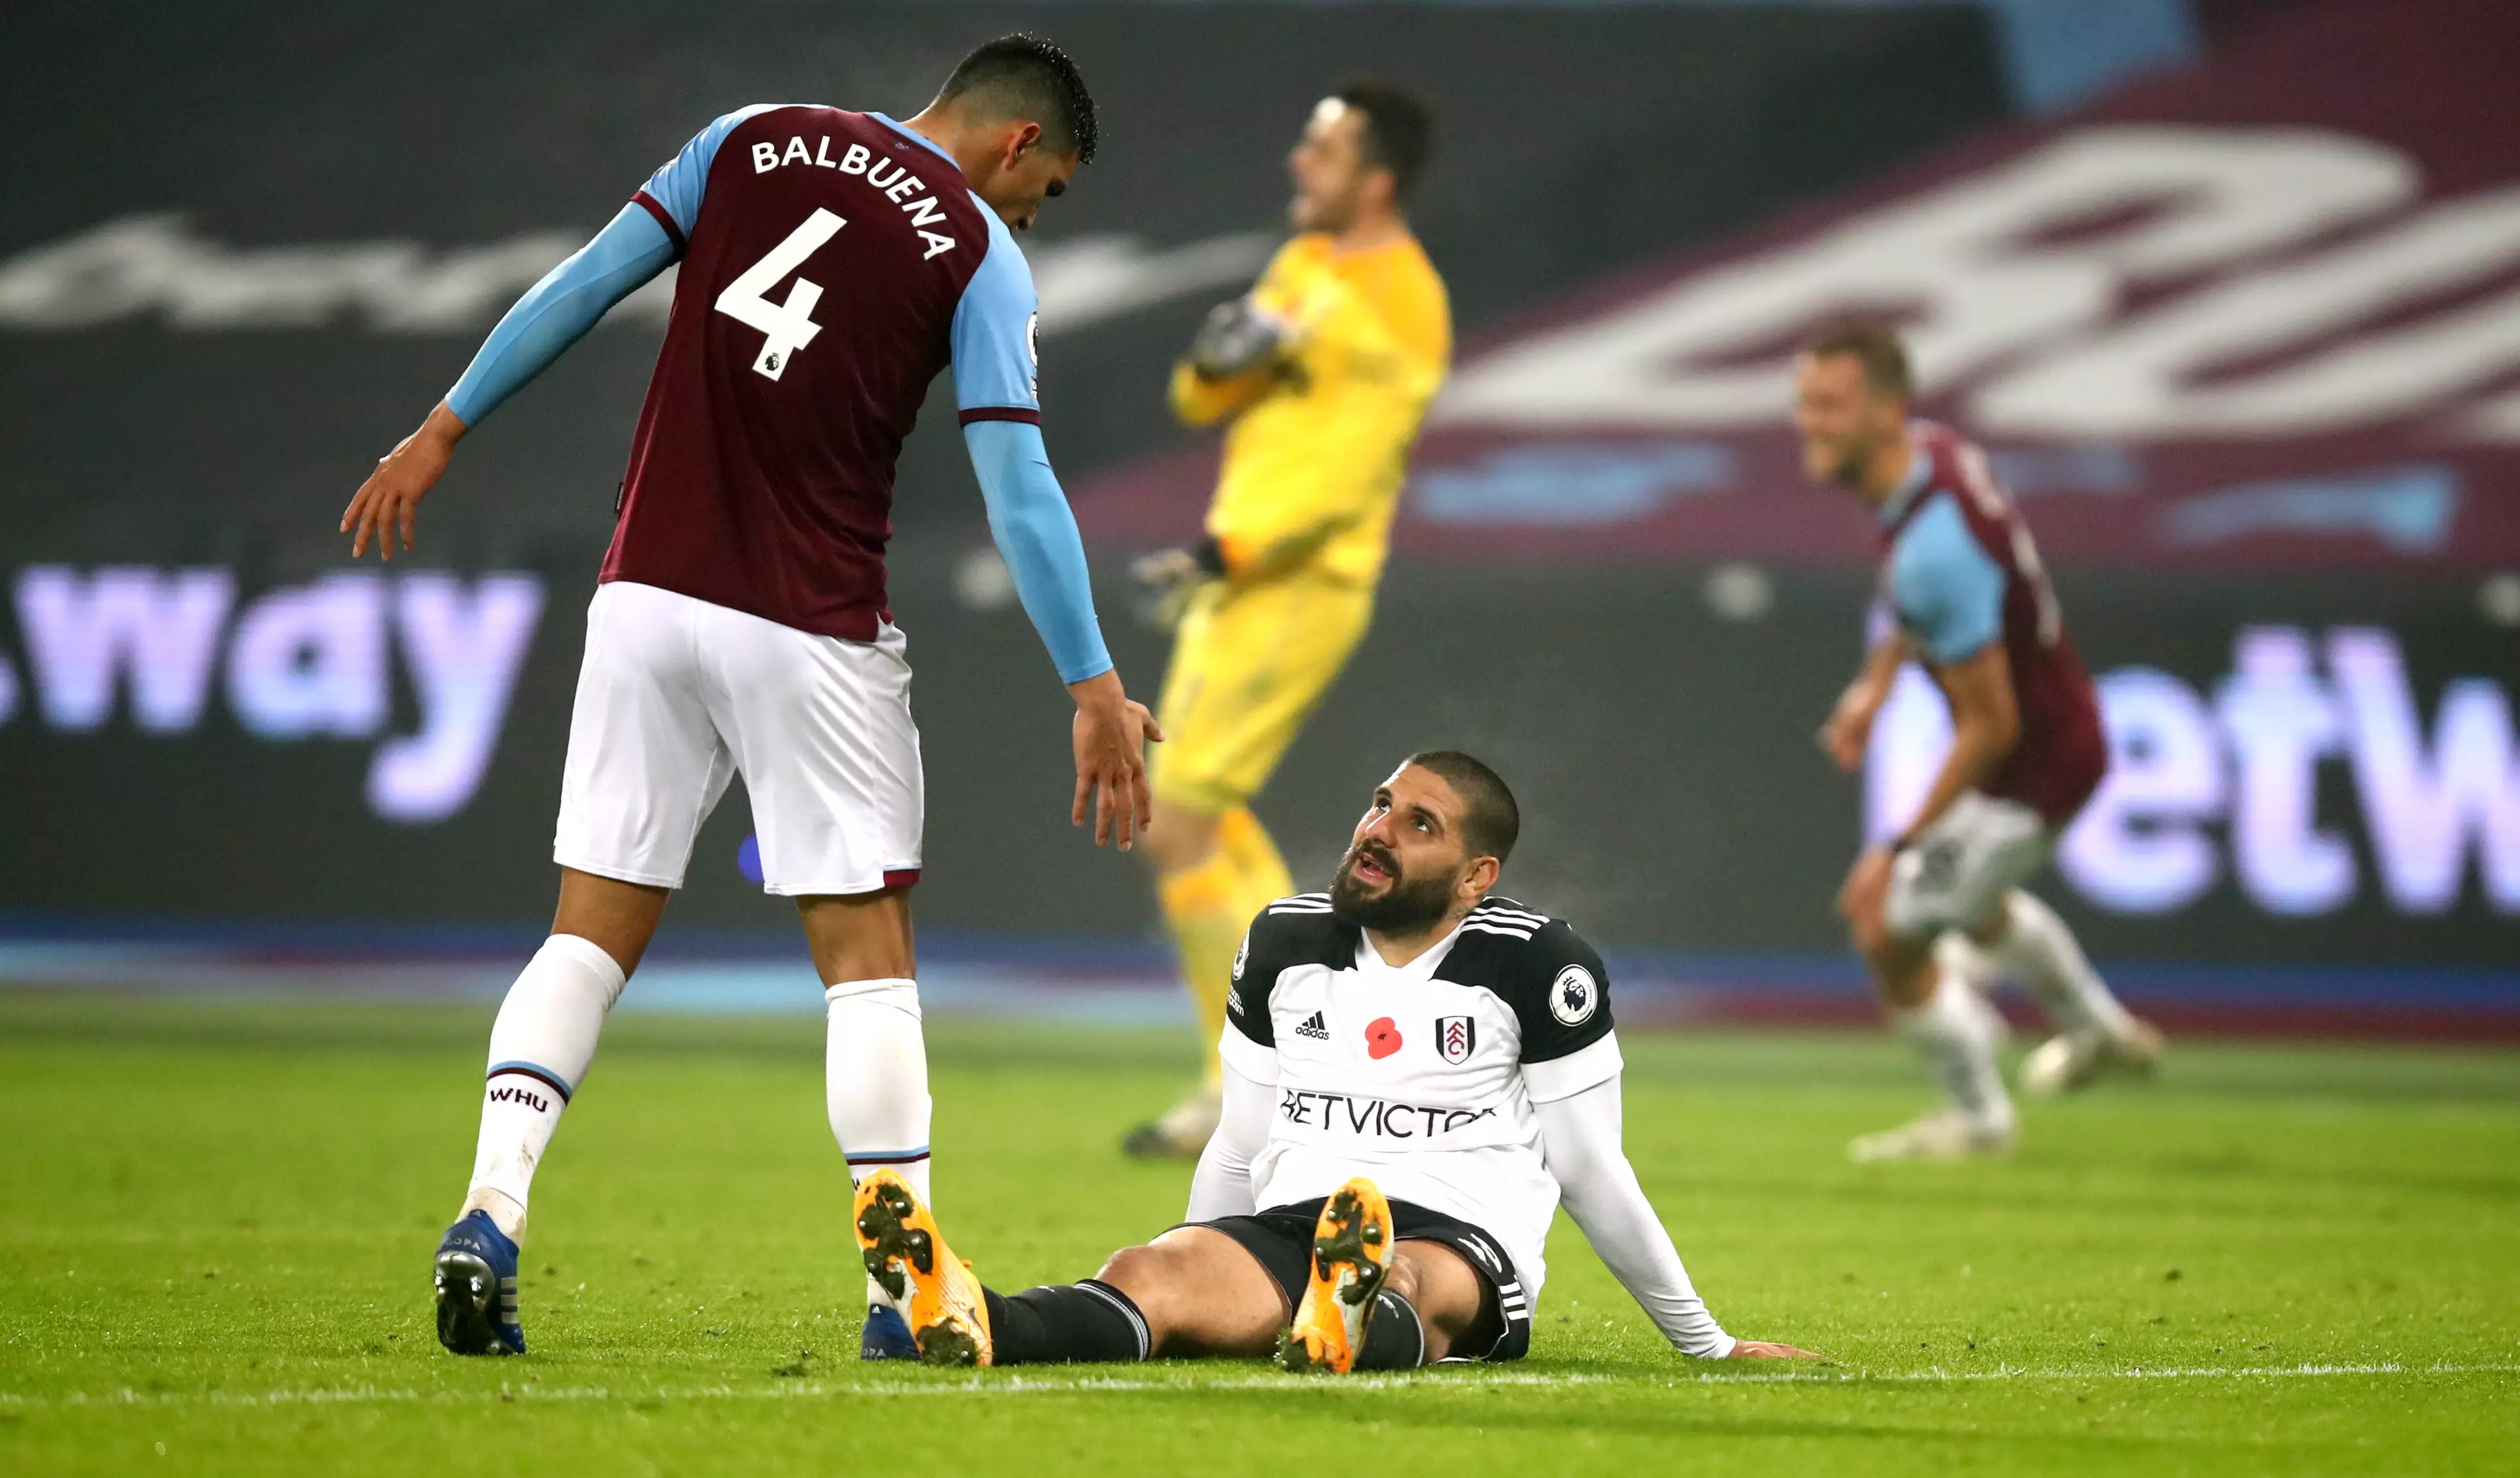 Fabian Balbuena is likely to be at the heart of West Ham's defence with Craig Dawson suspended